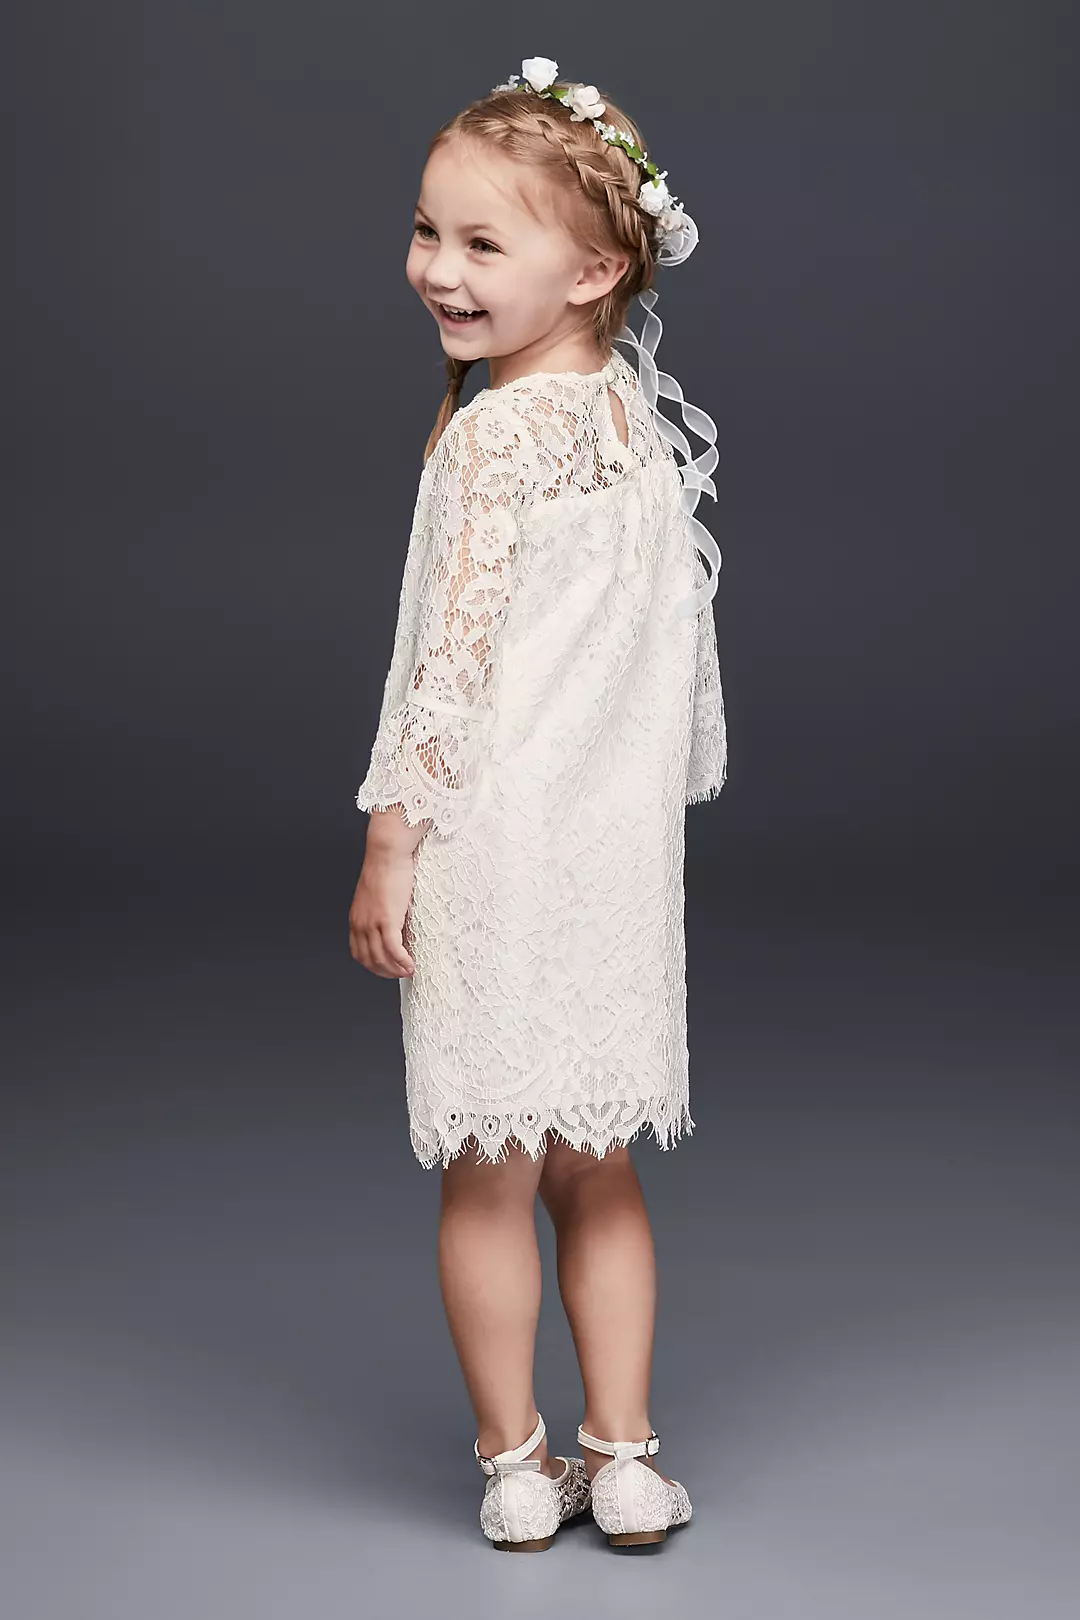 Short Lace Flower Girl Dress with Illusion Sleeves Image 2